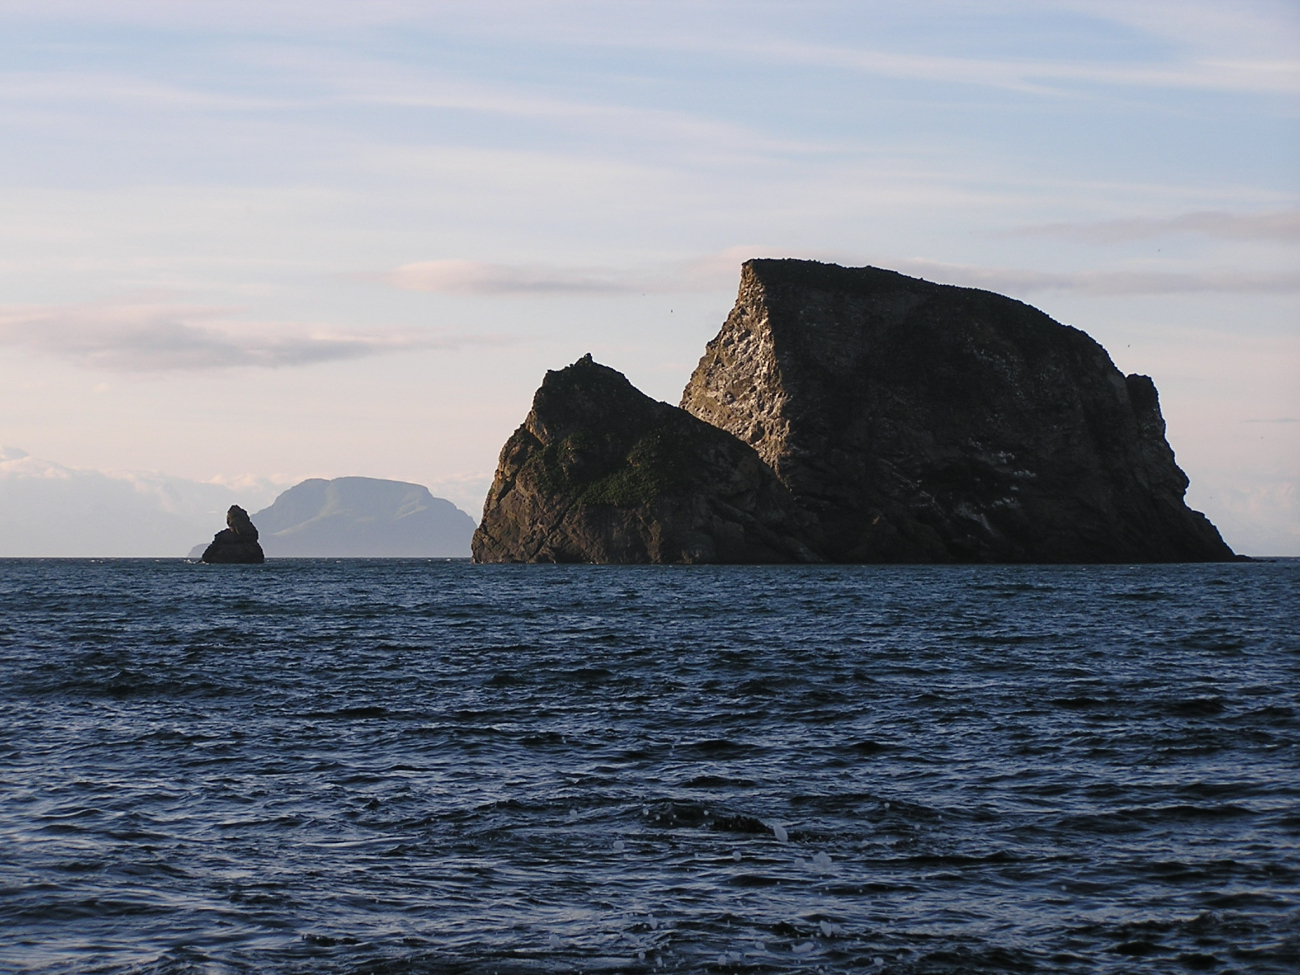 Offshore rocks or small islands? A scene in the Shumagin Islands